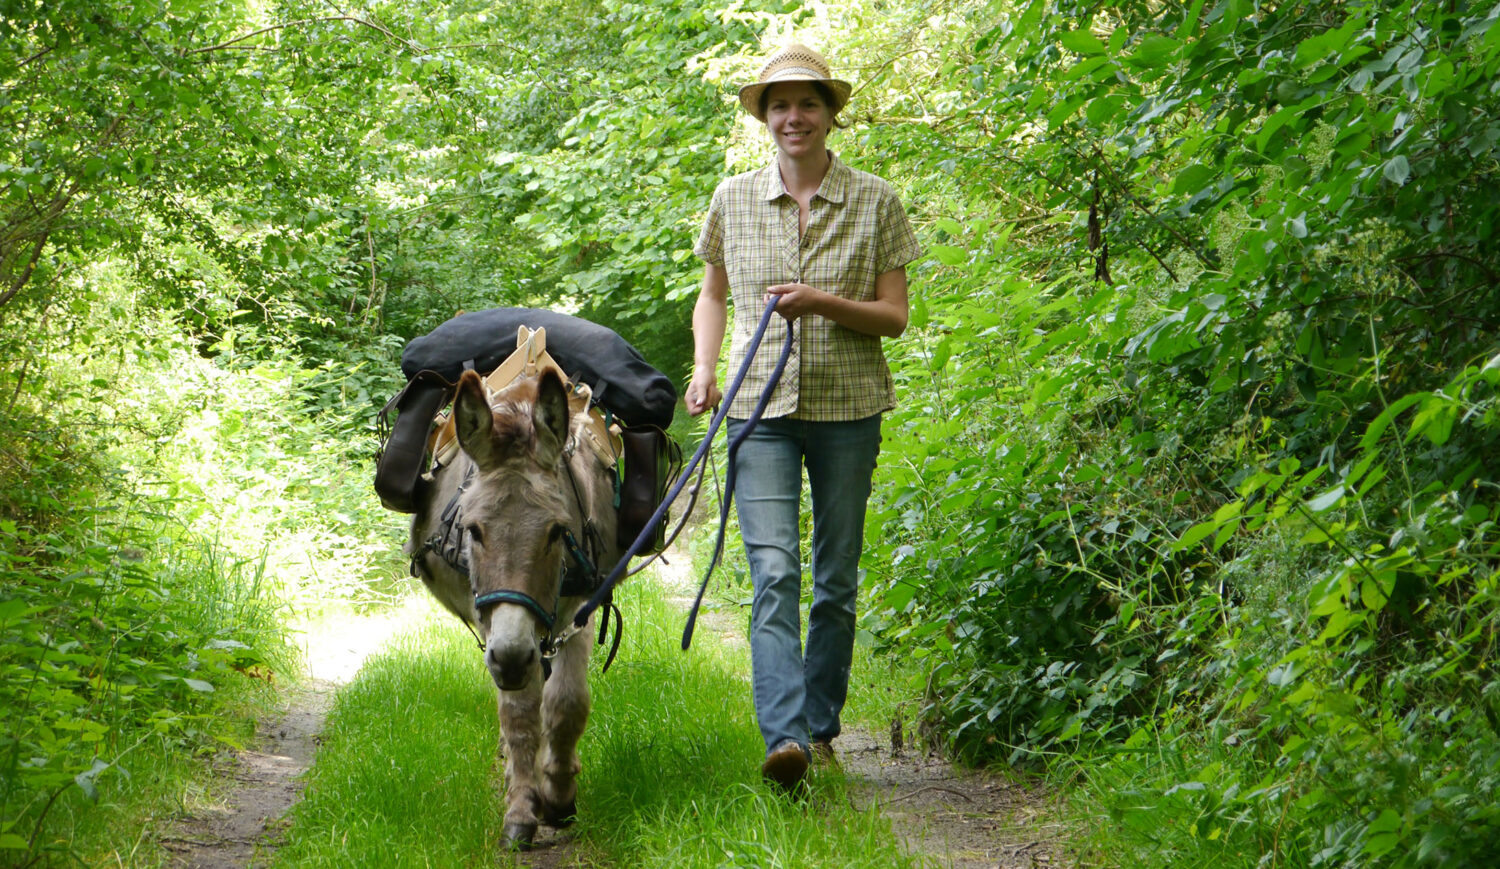 Those who prefer to travel with donkeys will find what they are looking for at the donkey trail in Groß Bengerstorf